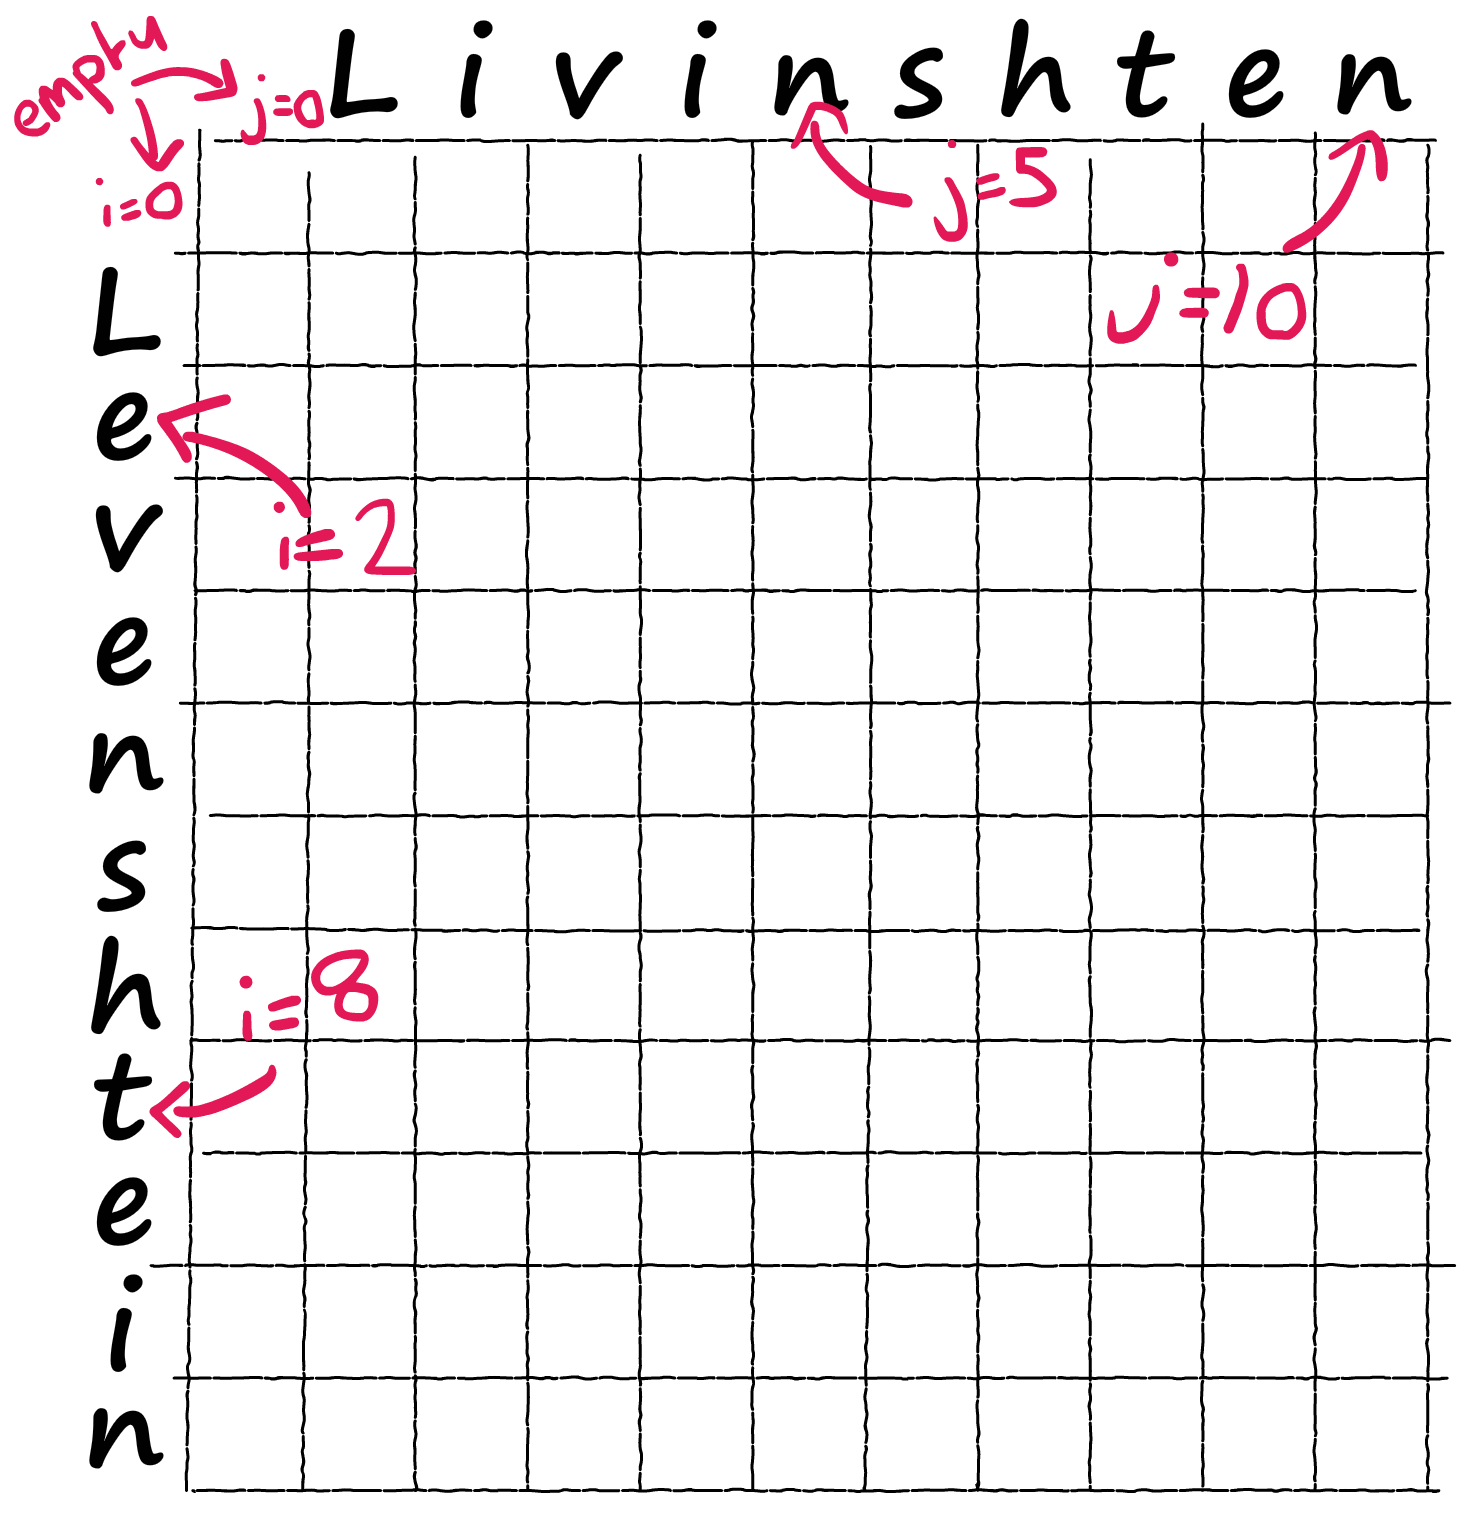 Our empty Wagner-Fischer matrix — we&rsquo;ll be using this to calculate the Levenshtein distance between &lsquo;Levenshtein&rsquo; and &lsquo;Livinshten&rsquo;.